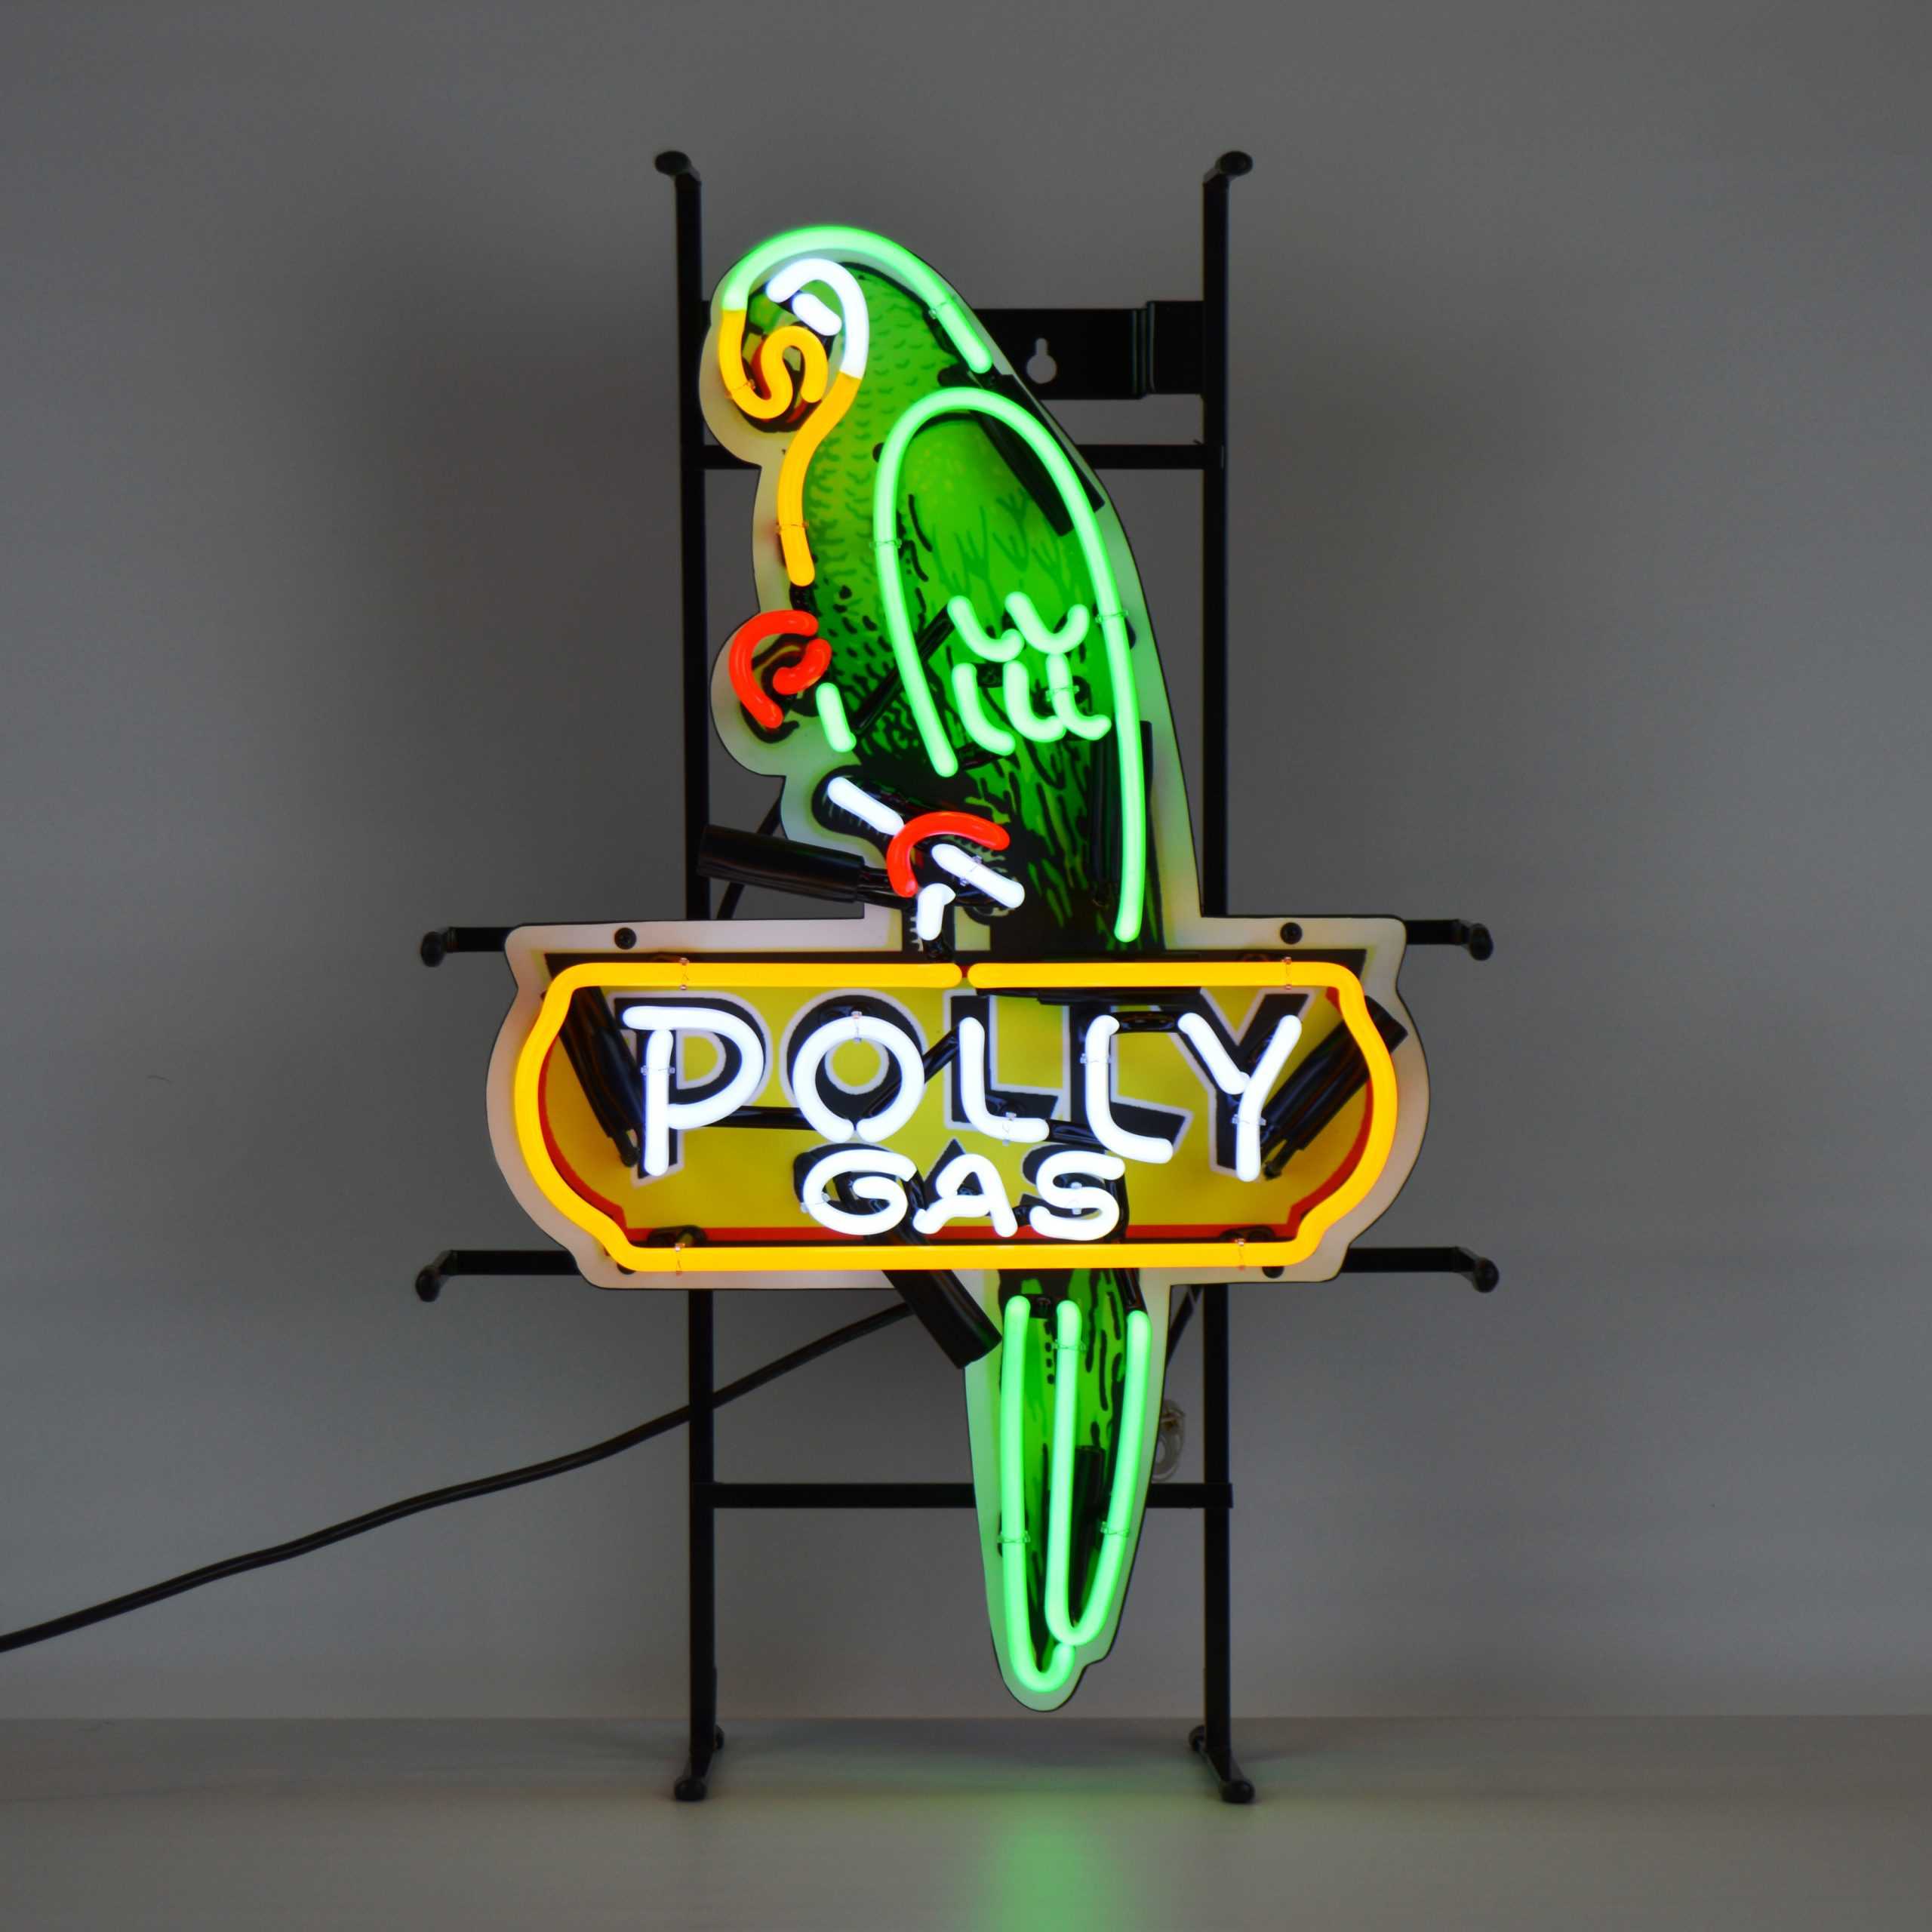 GAS - SHAPED POLLY GAS NEON SIGN WITH BACKING